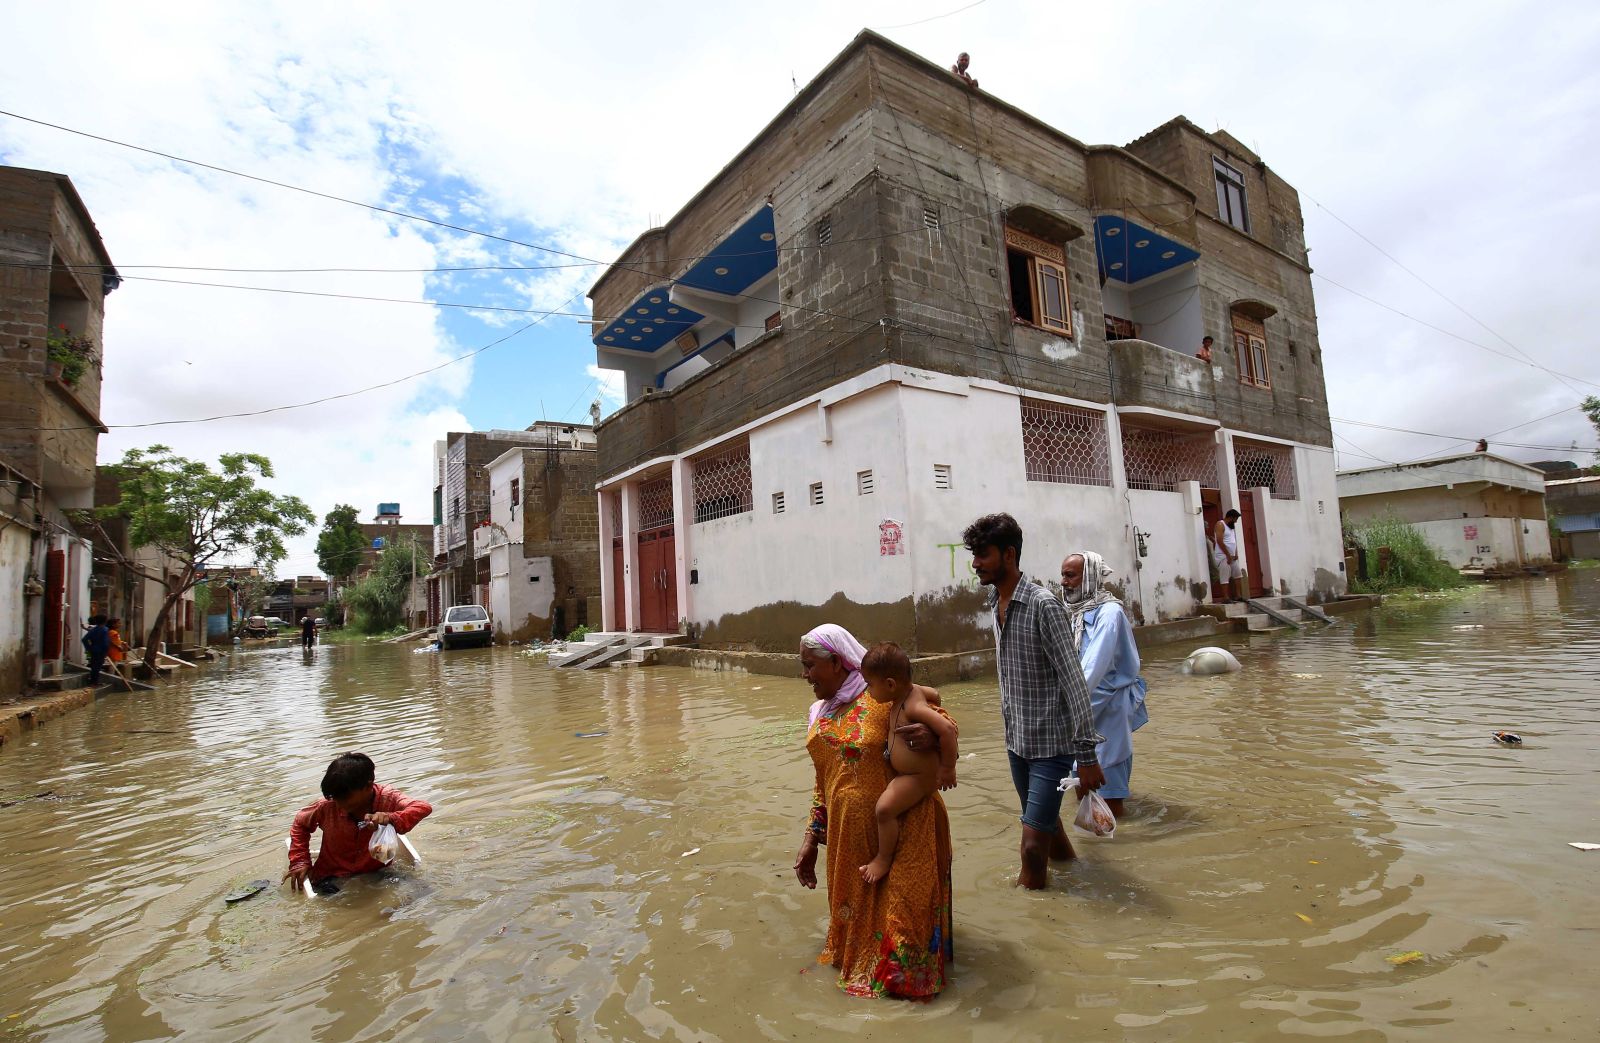 epa10065075 People make their way through a flooded area after heavy monsoon rains in Karachi, Pakistan, 11 July 2022. Heavy rains have claimed 77 lives so far in Pakistan during the current monsoon season that started on June 14, according to Sherry Rehman, Federal Minister for Climate Change. Heavy rains have lashed multiple parts of the country, with Balochistan being the most severely affected, with 274 percent more precipitation than the average, while in Sindh it was 261 percent, according to the minister.  EPA/SHAHZAIB AKBER